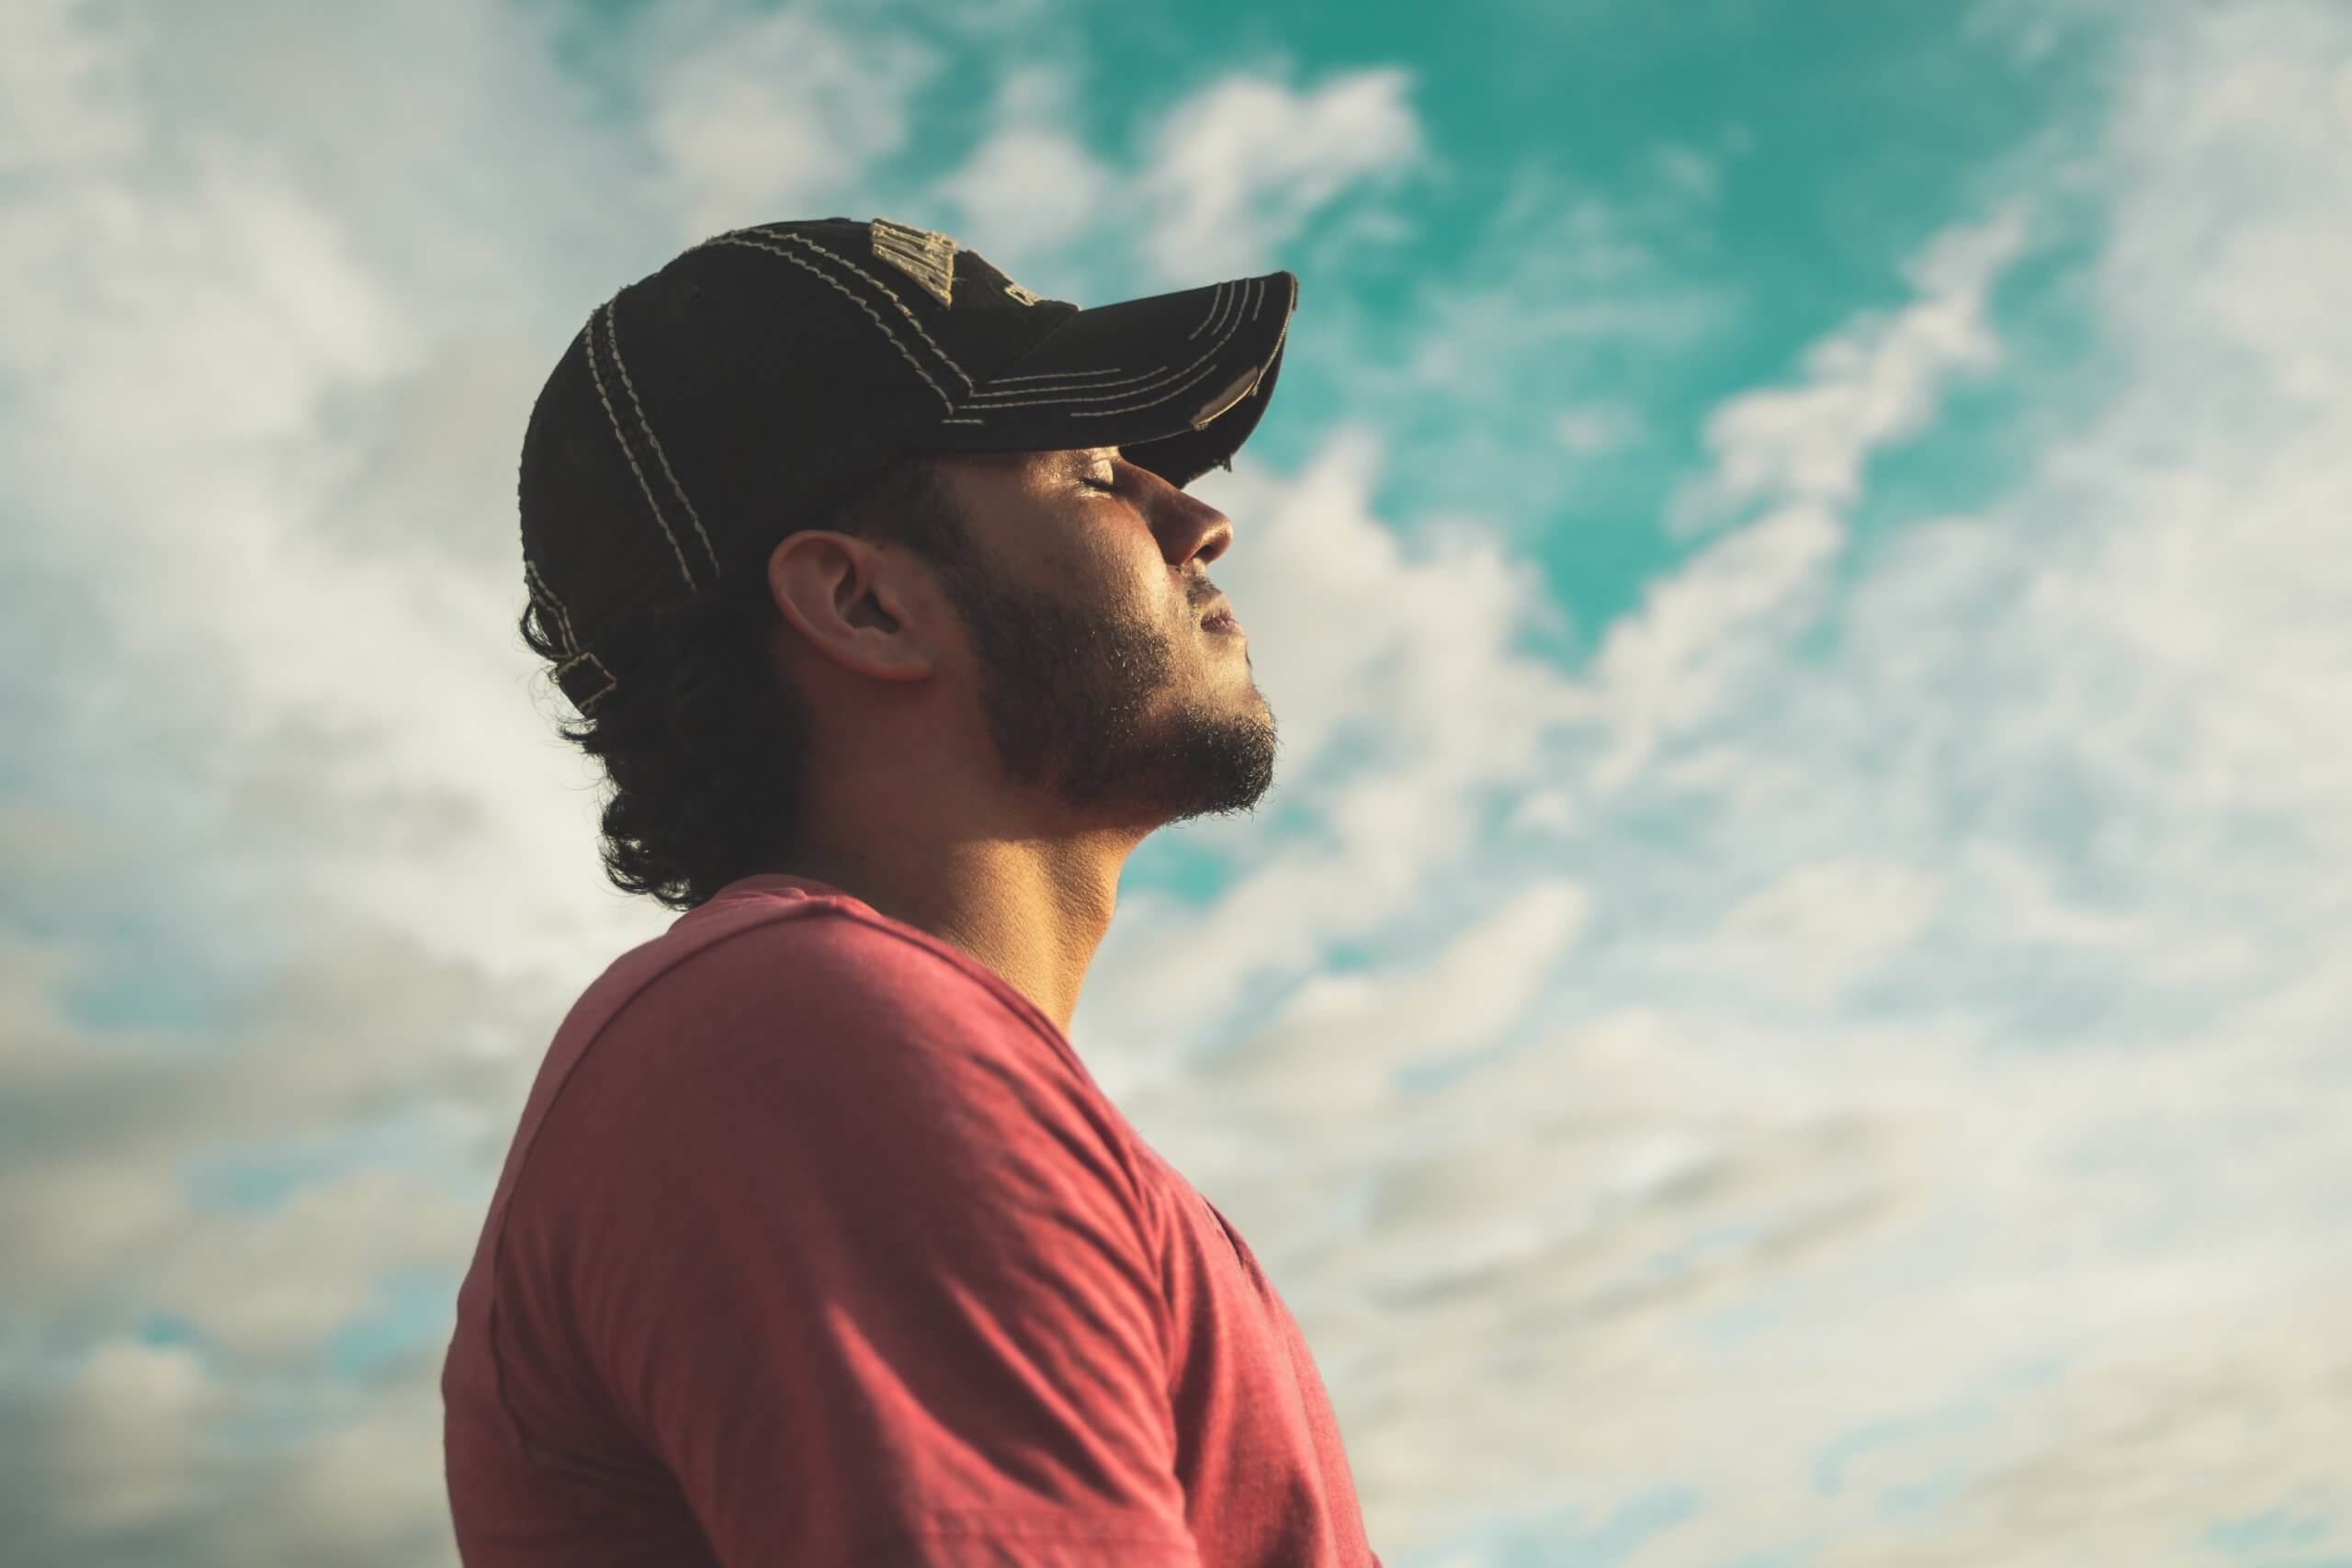 man-wearing-black-cap-with-eyes-closed-under-cloudy-sky-810775